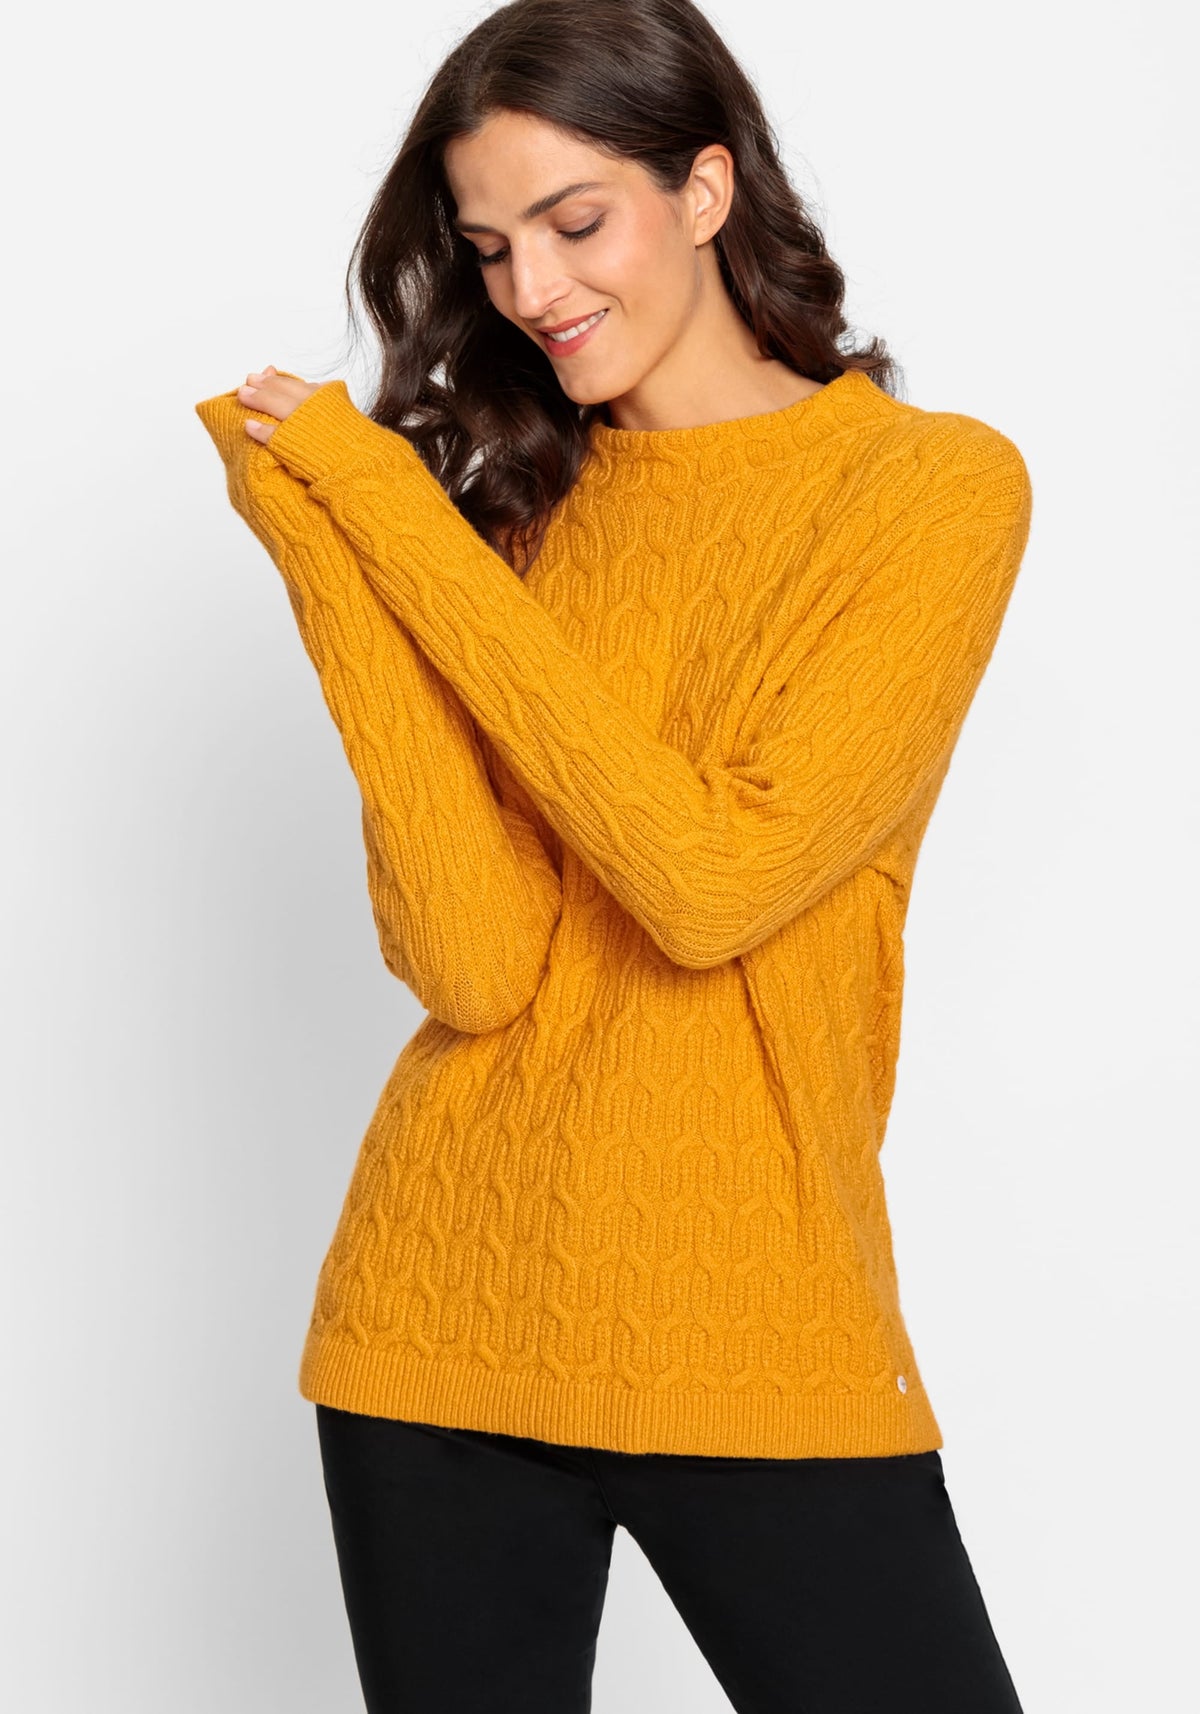 Cotton Blend Long Sleeve Allover Cable Knit Pullover